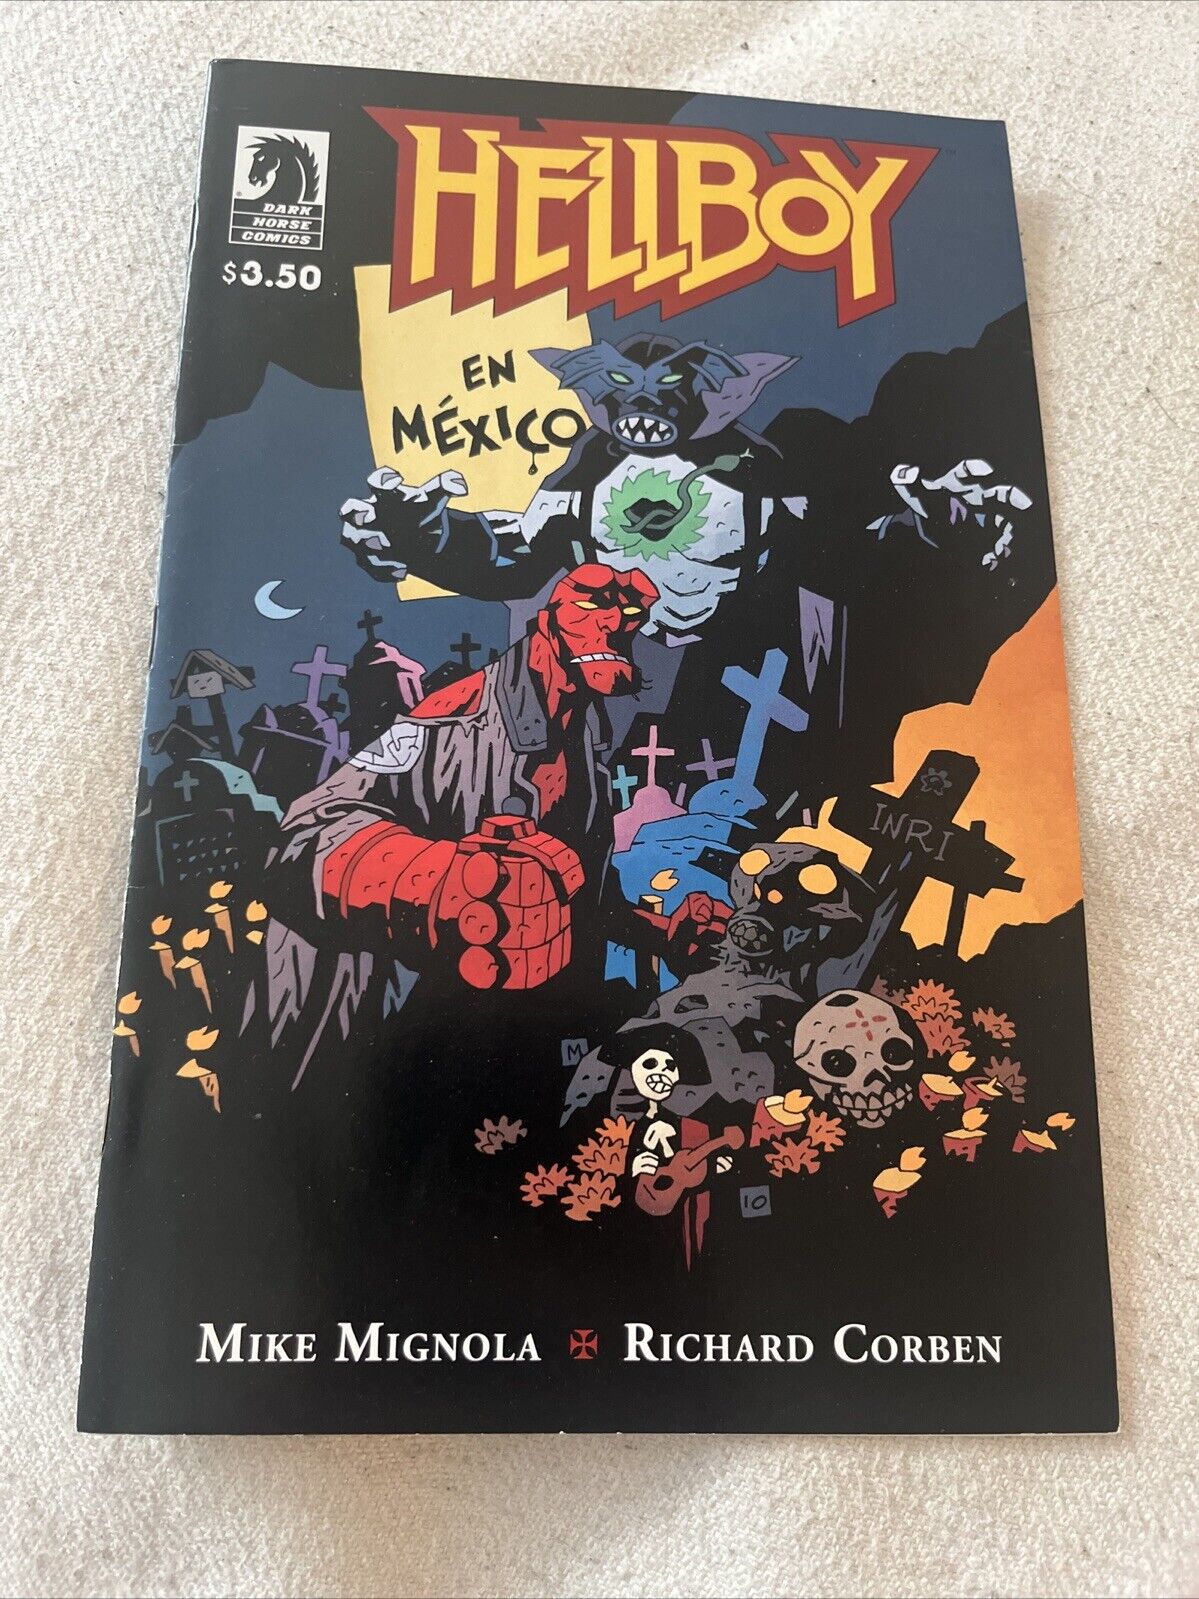 Hellboy In Mexico 2010 Variant Very Fine/Near Mint Mike Mignola